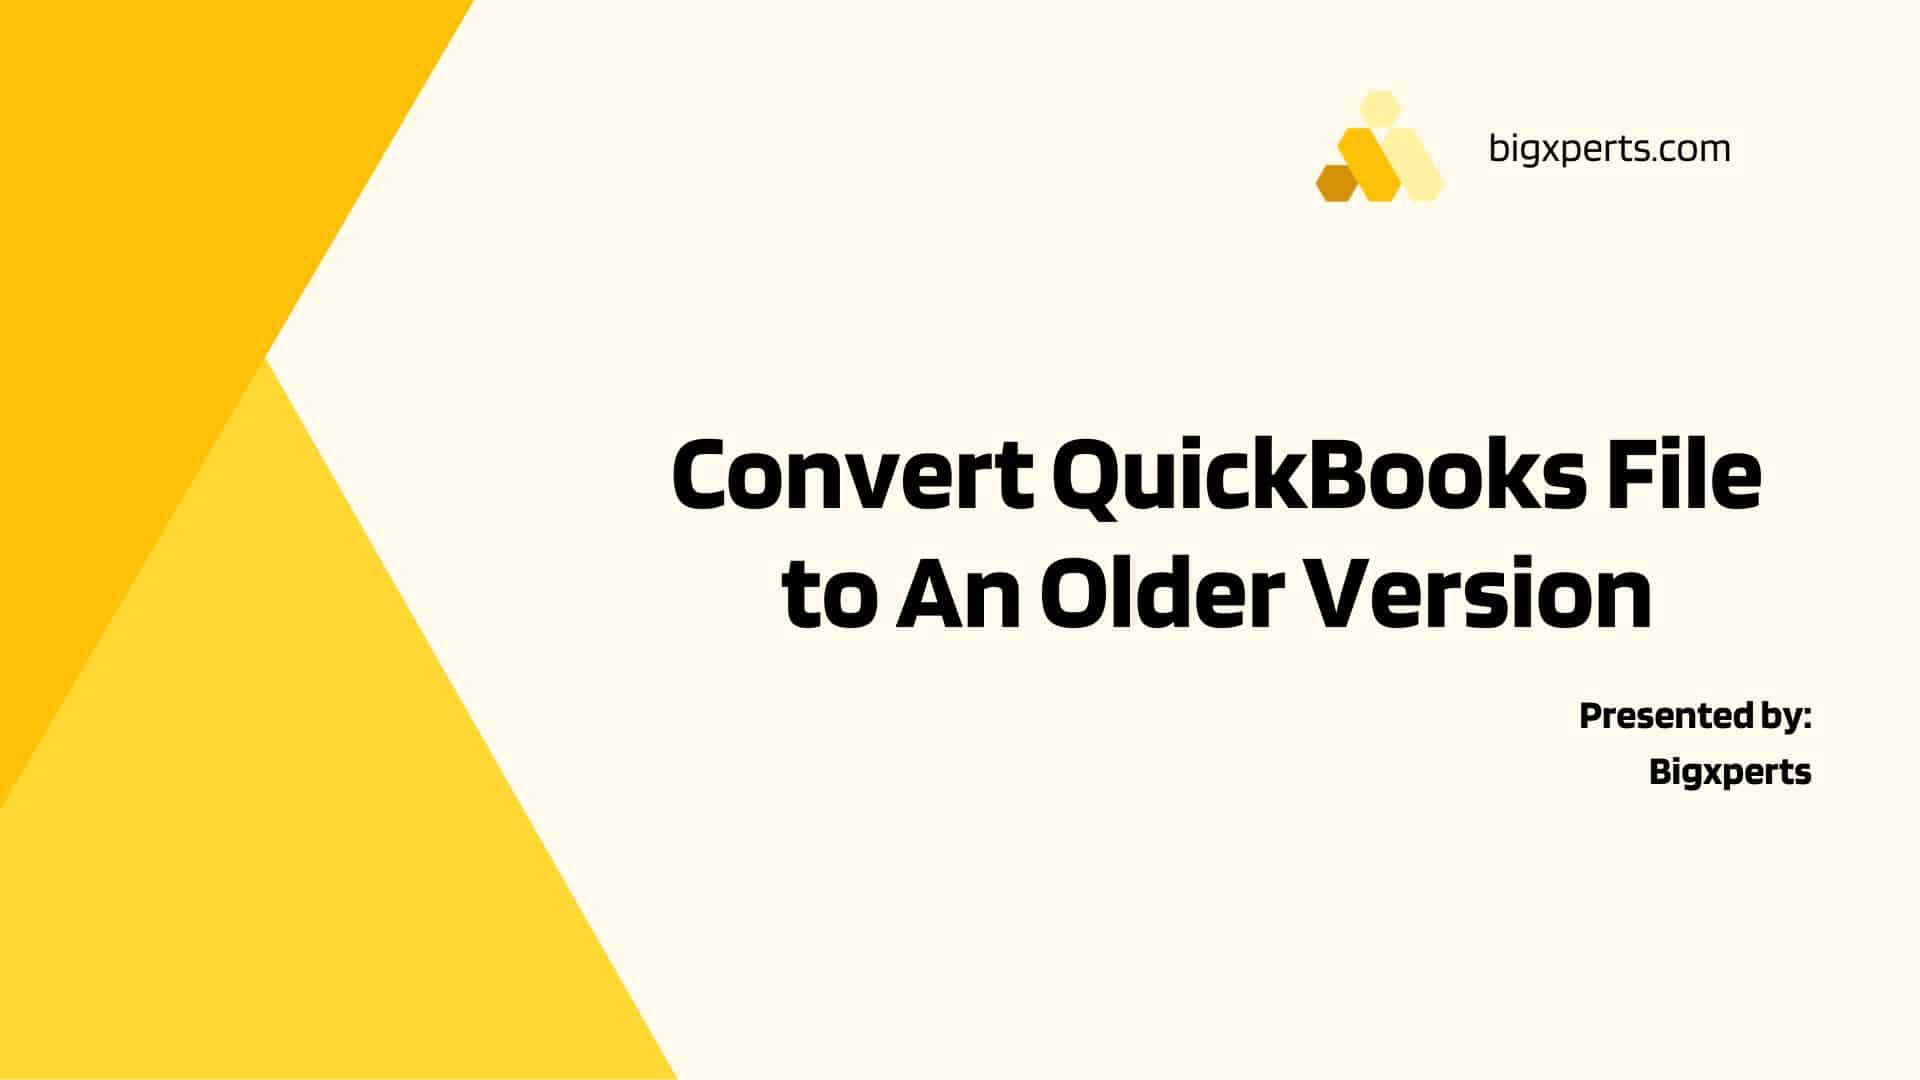 Convert QuickBooks File to An Older Version